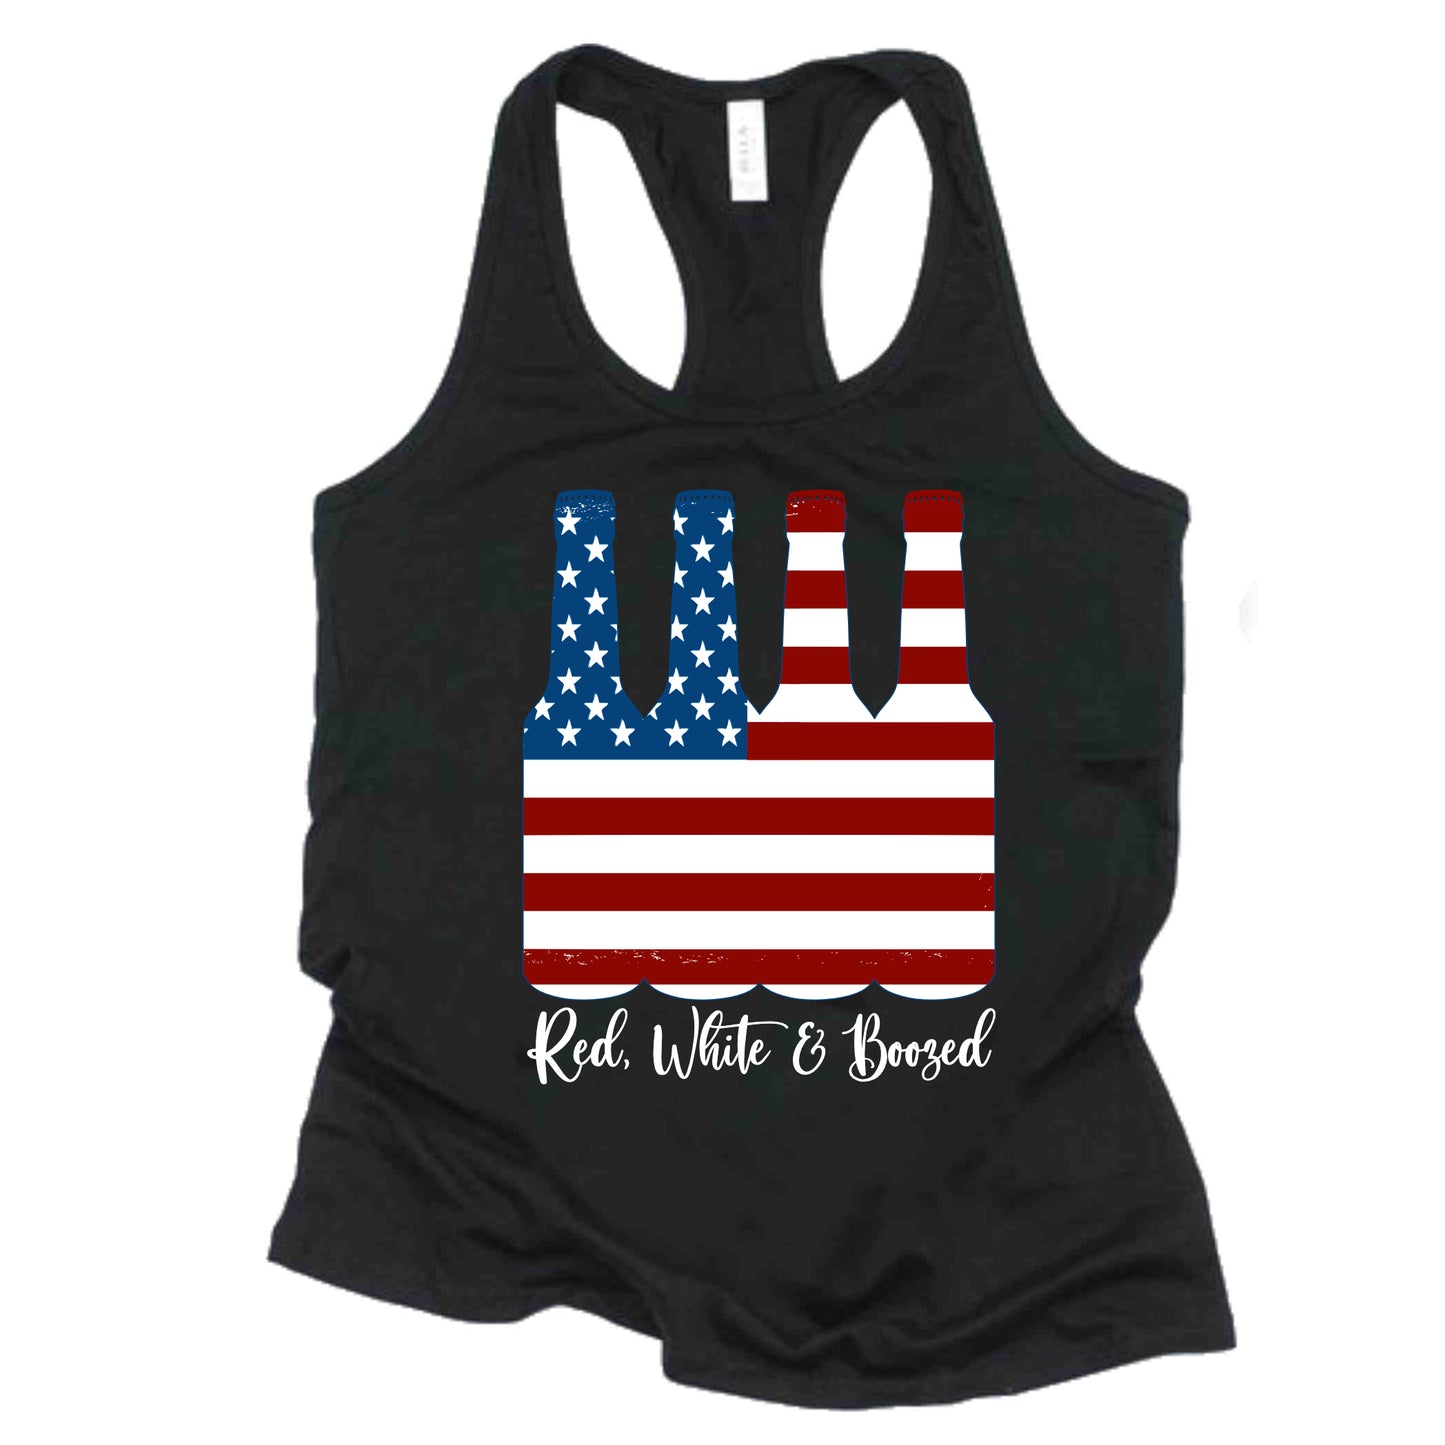 Red, White and Boozed summertime tanks . .